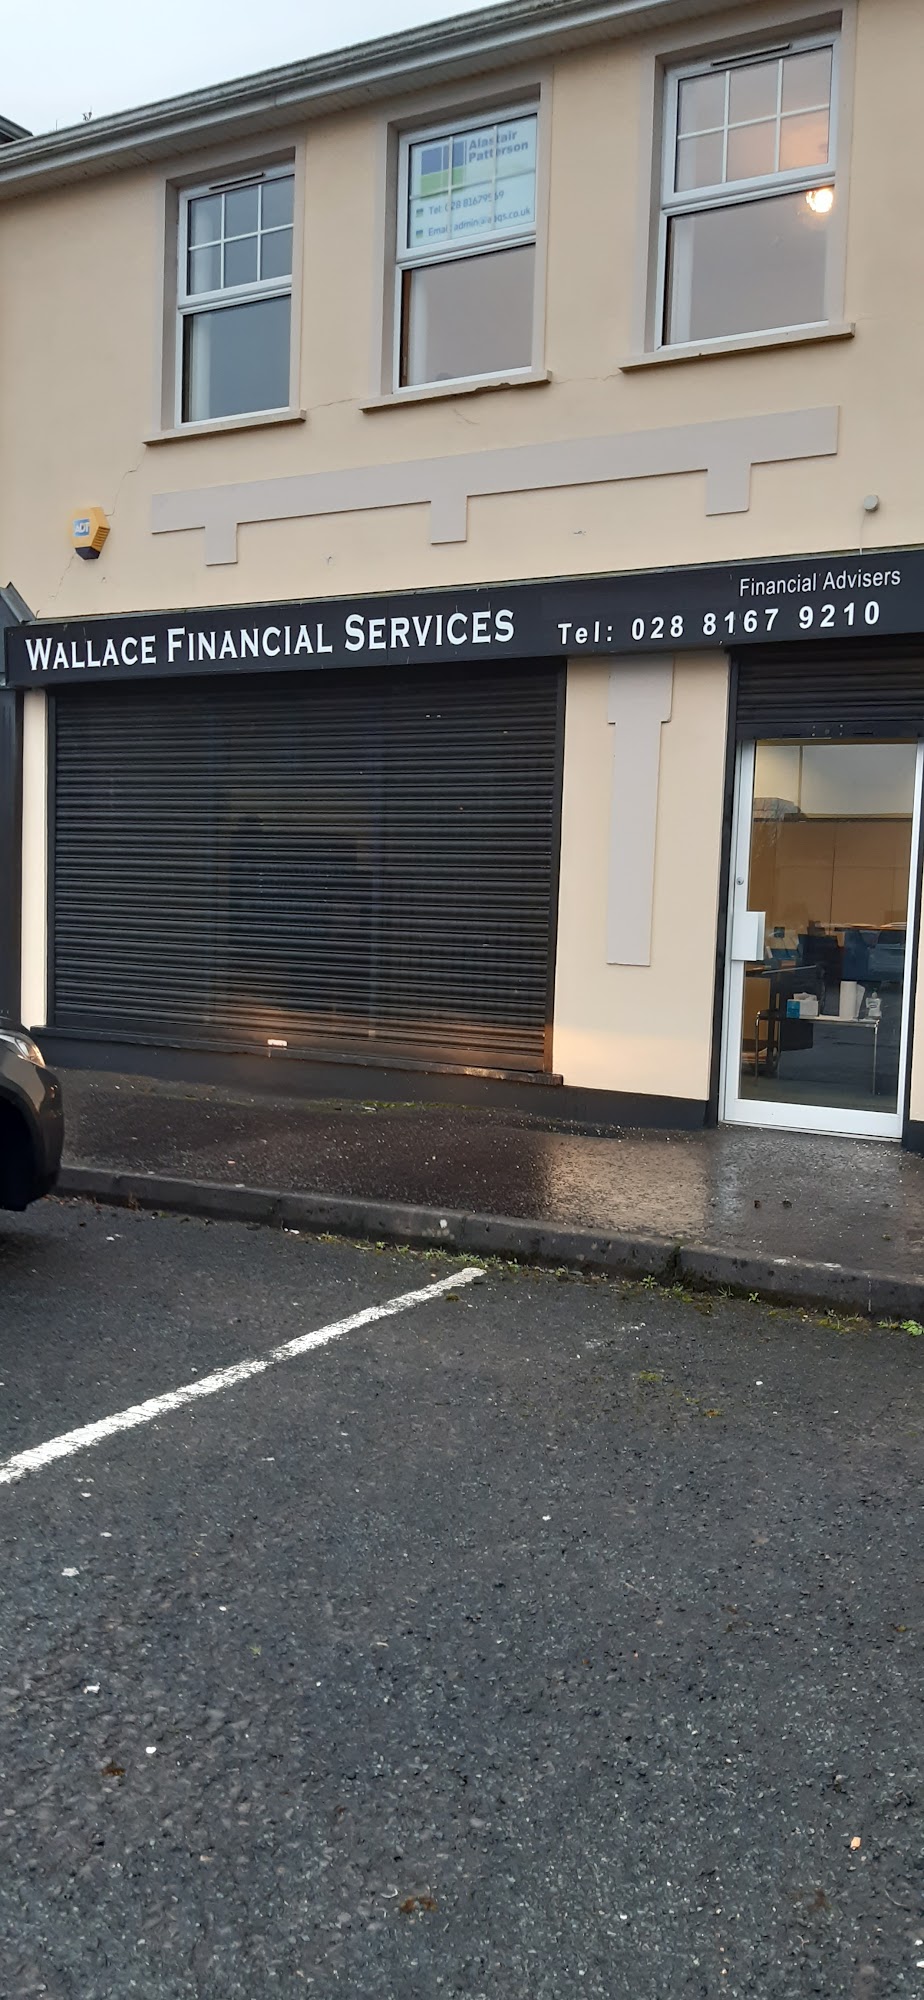 Wallace Financial Services